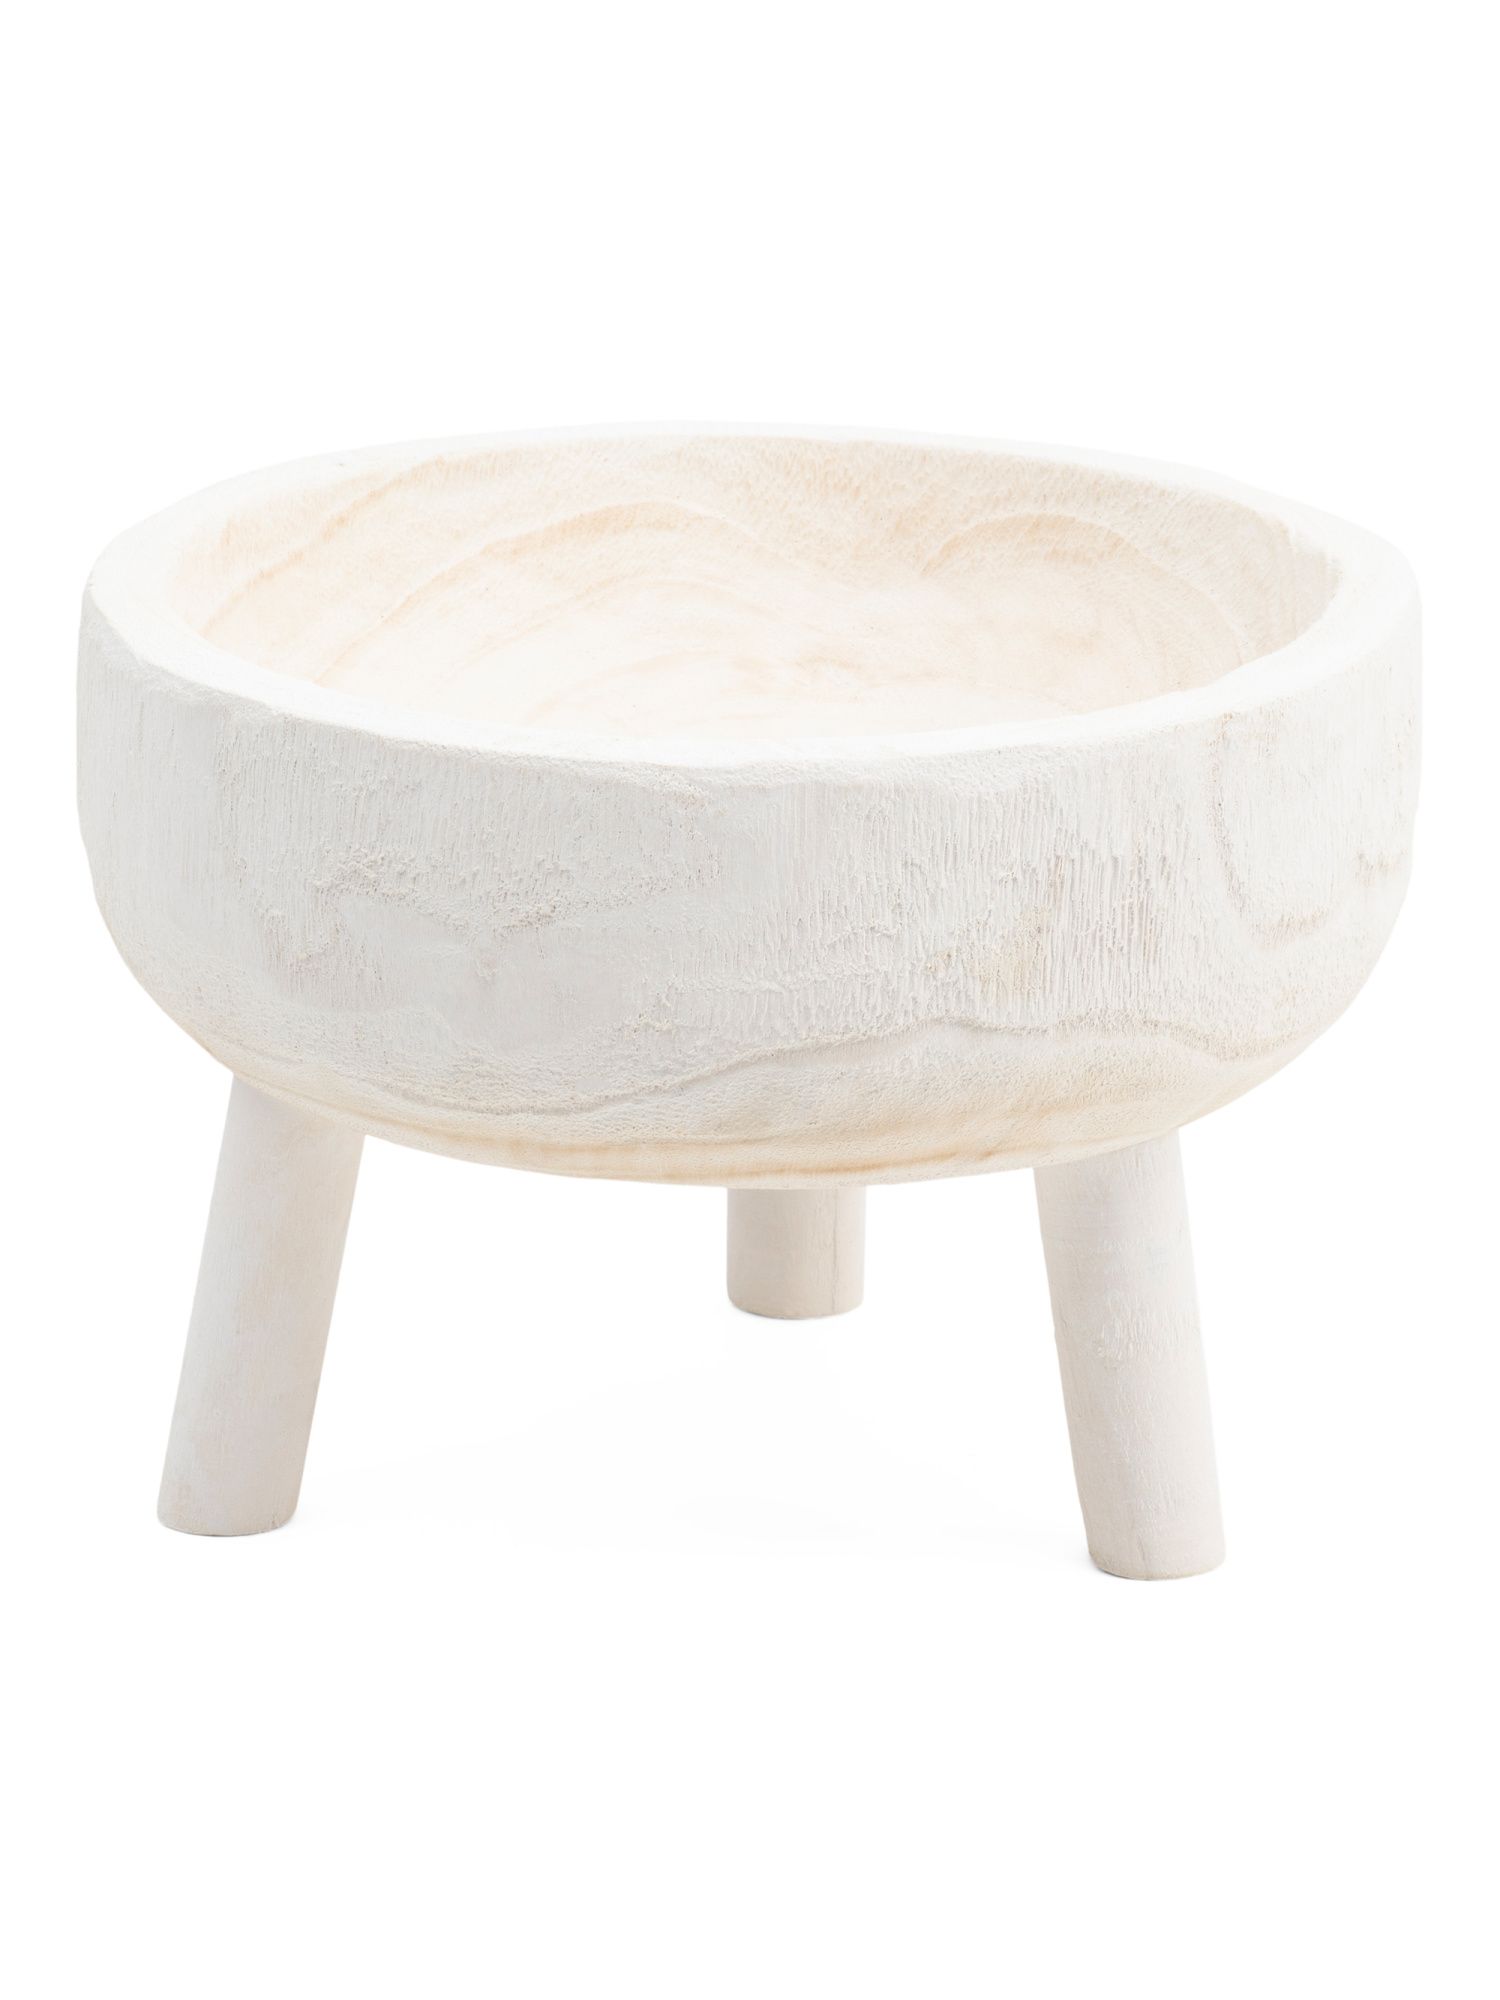 11in Wooden Bowl With Legs | TJ Maxx